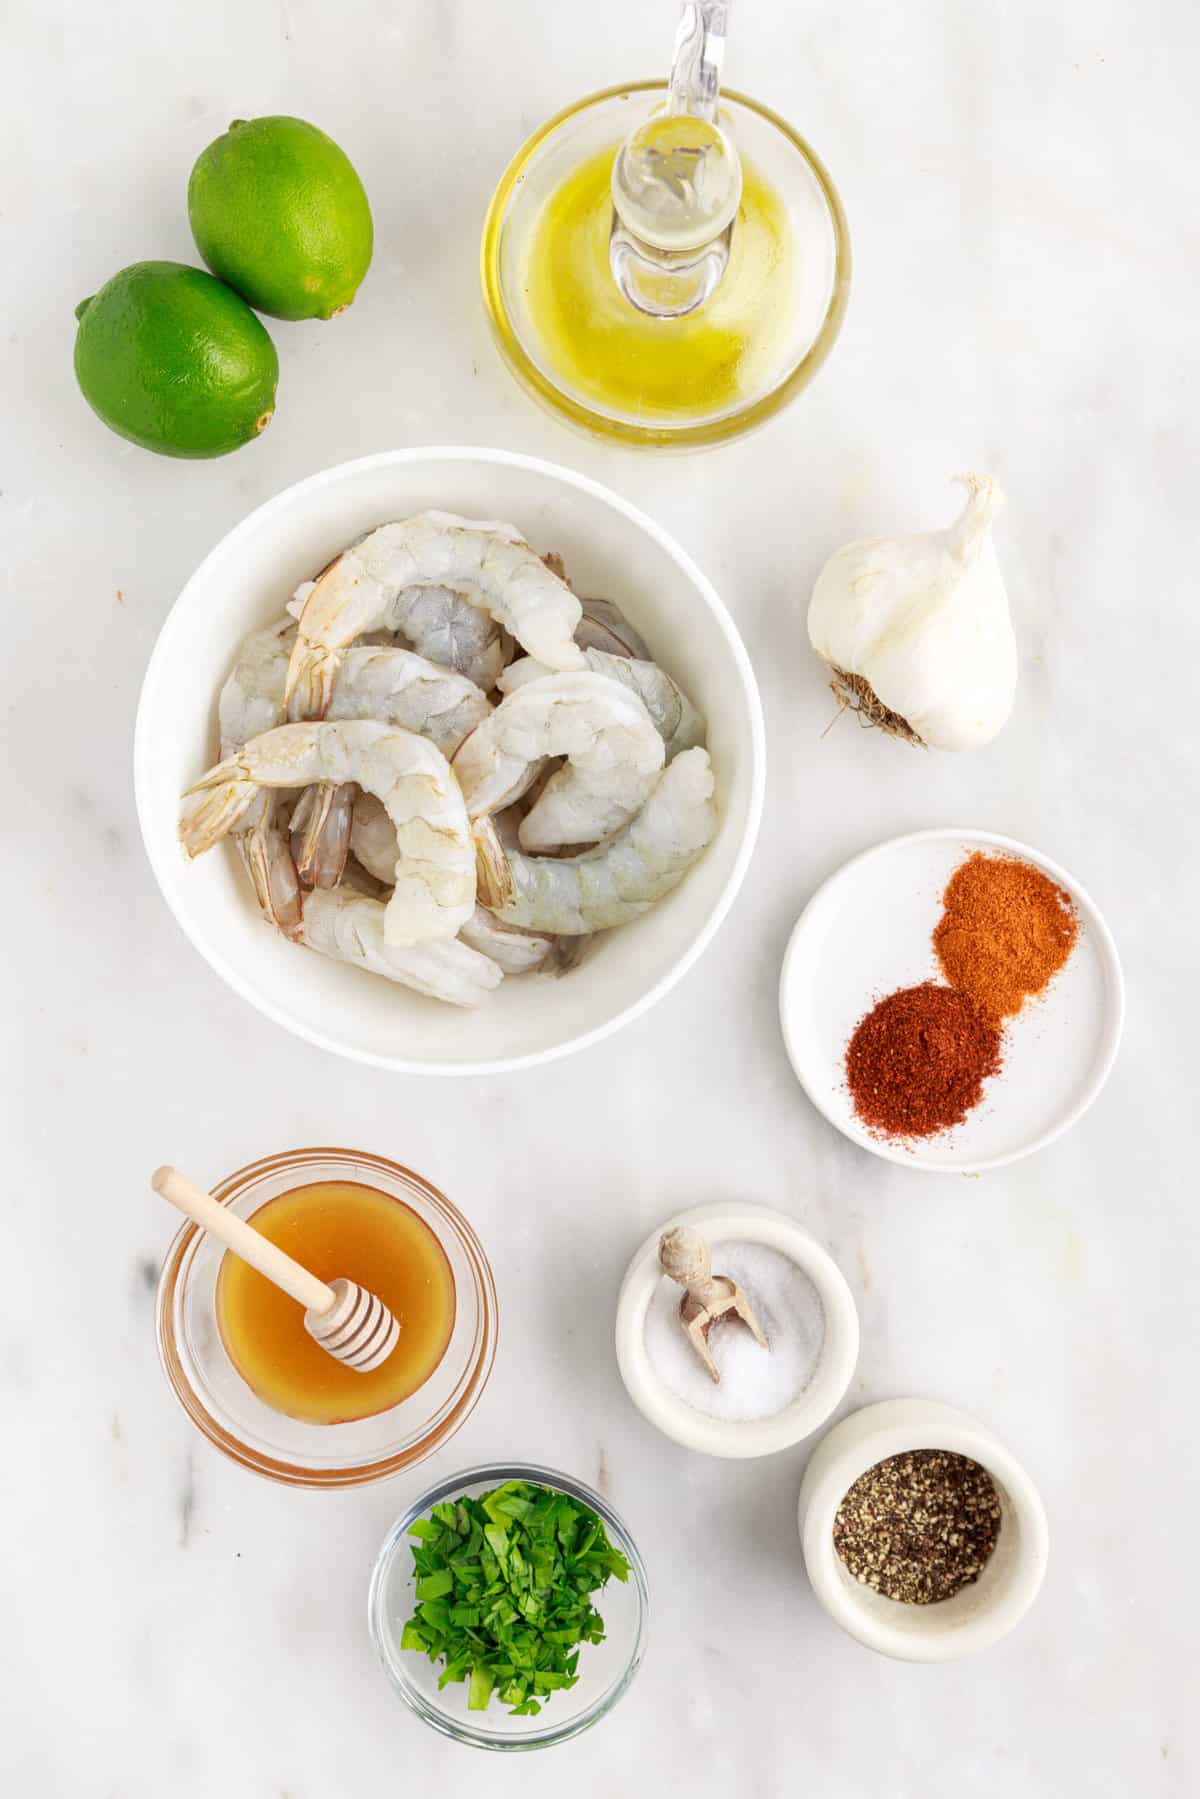 The ingredients for honey lime shrimp are spread out across a white surface.